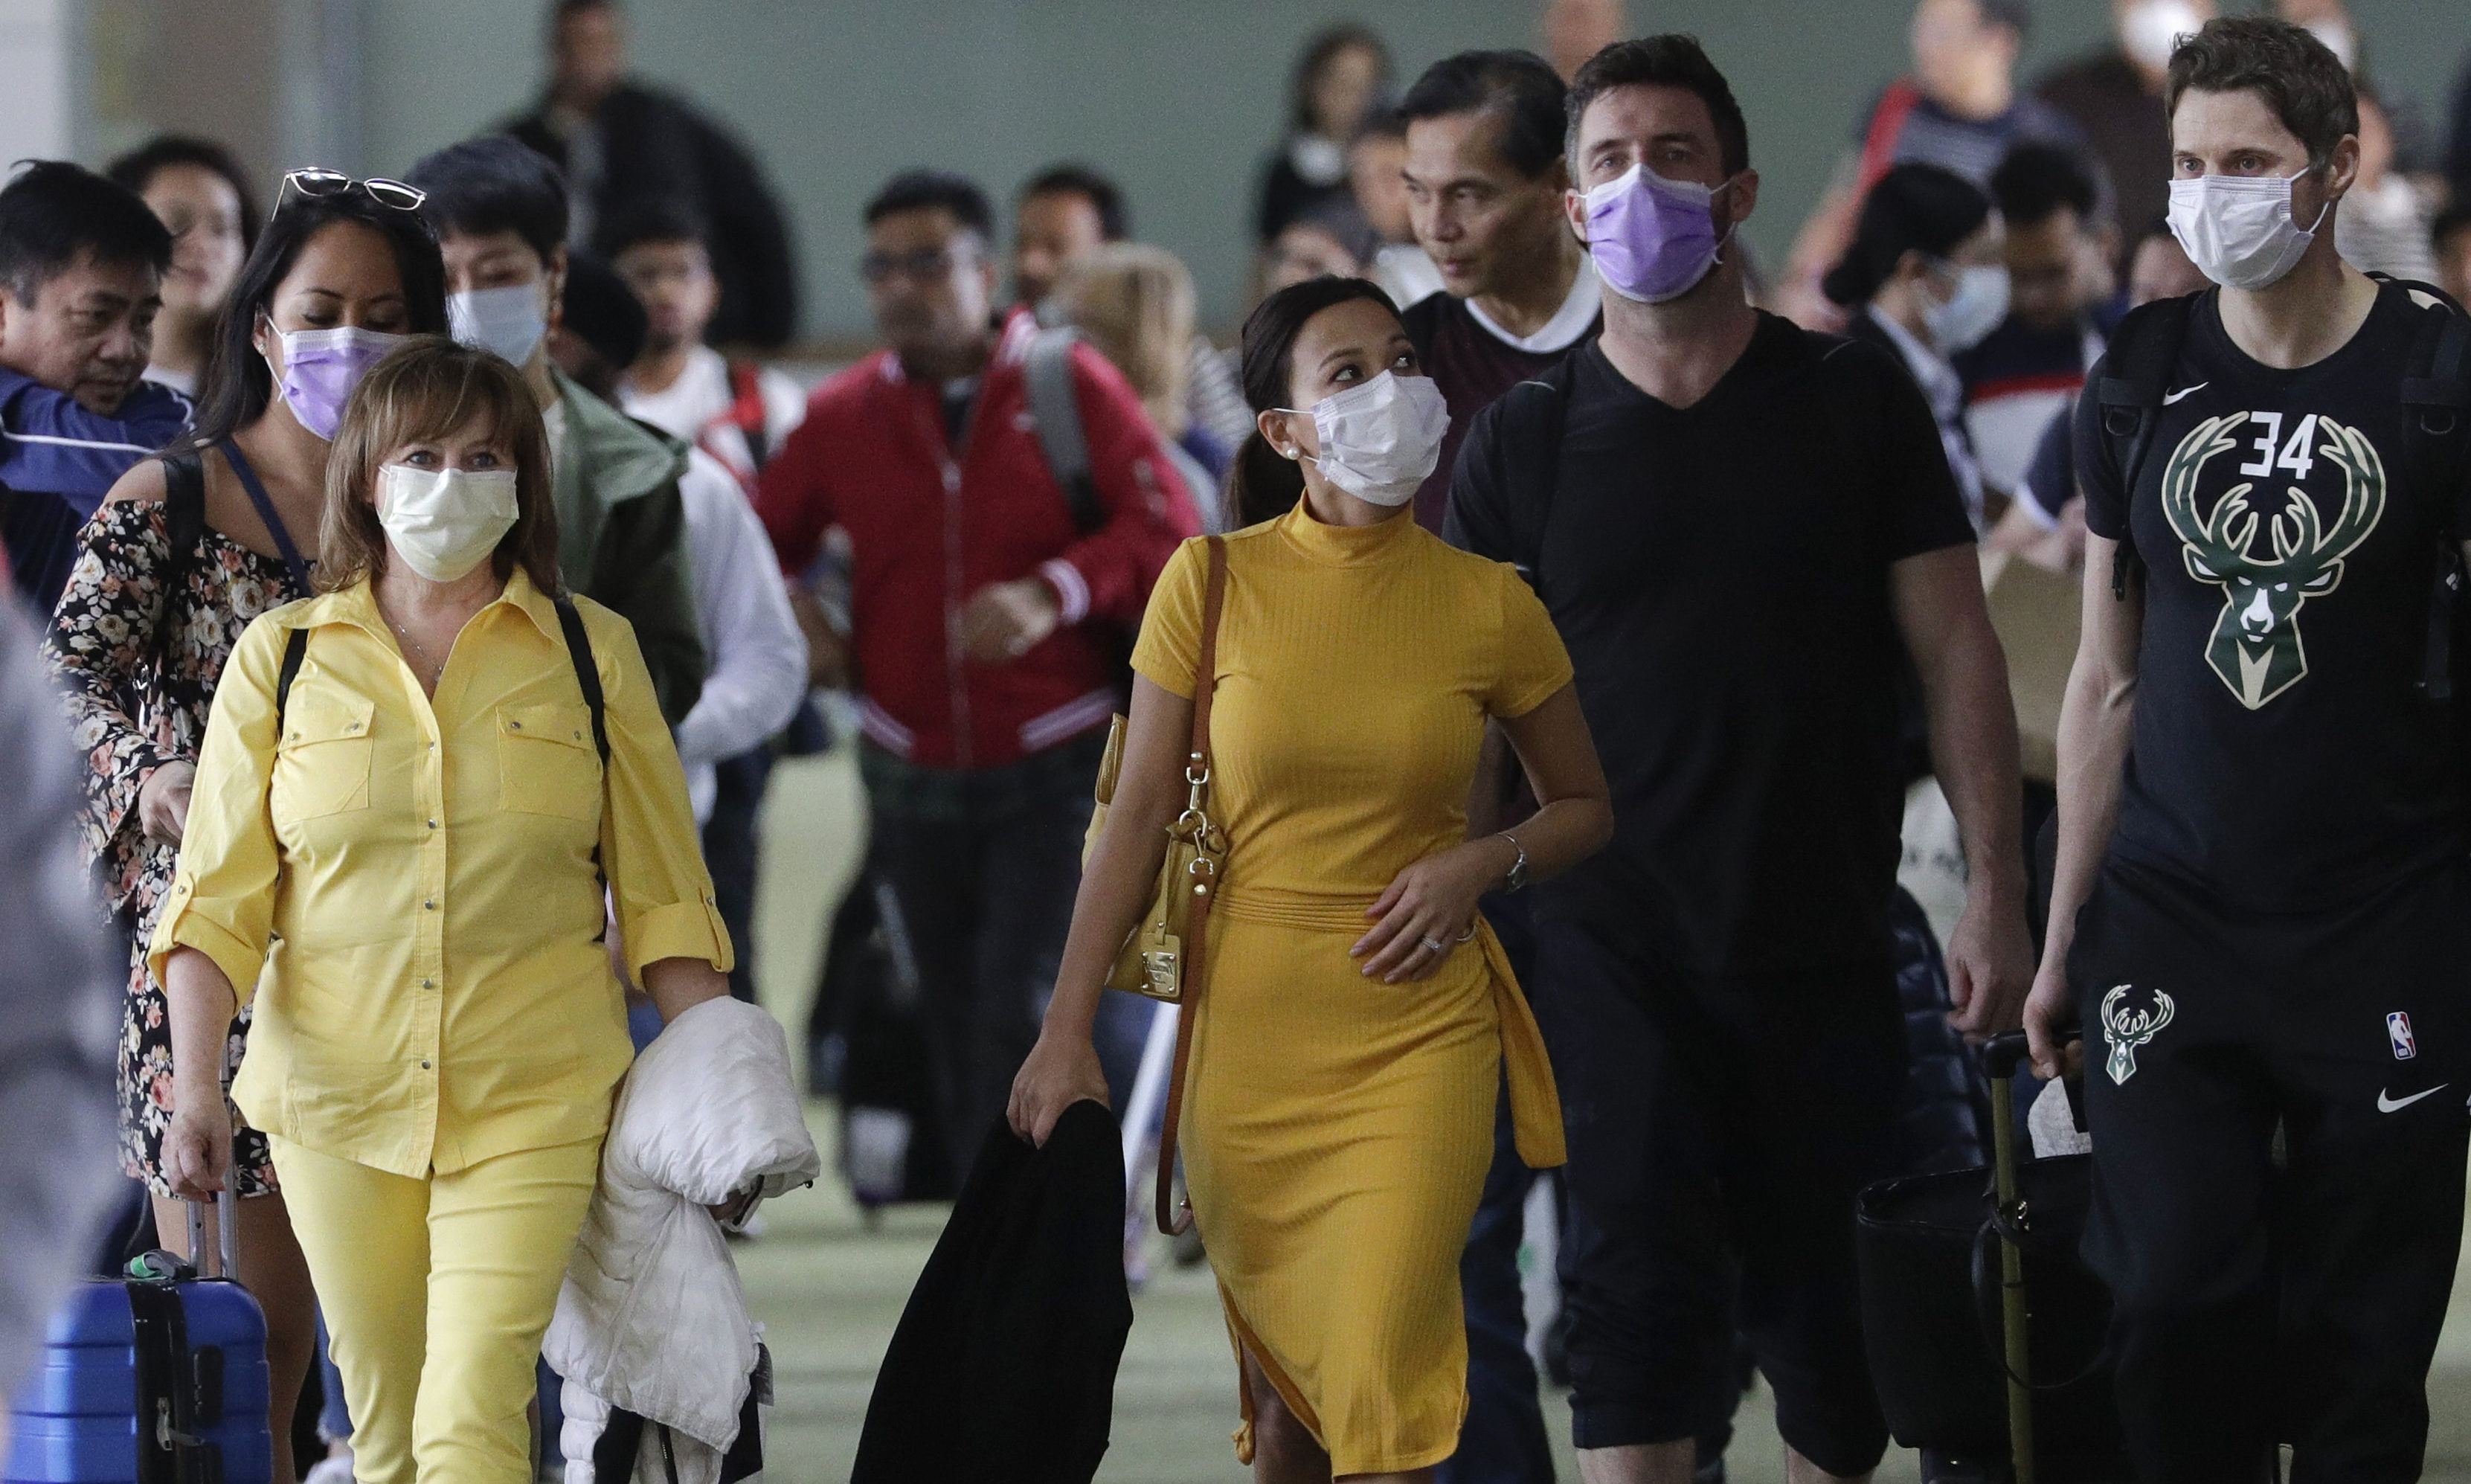 Passengers wear masks as they arrive at Manila's international airport, Philippines. The government is closely monitoring arrival of passengers as a new coronavirus outbreak in Wuhan, China has infected hundreds and caused deaths in that area.